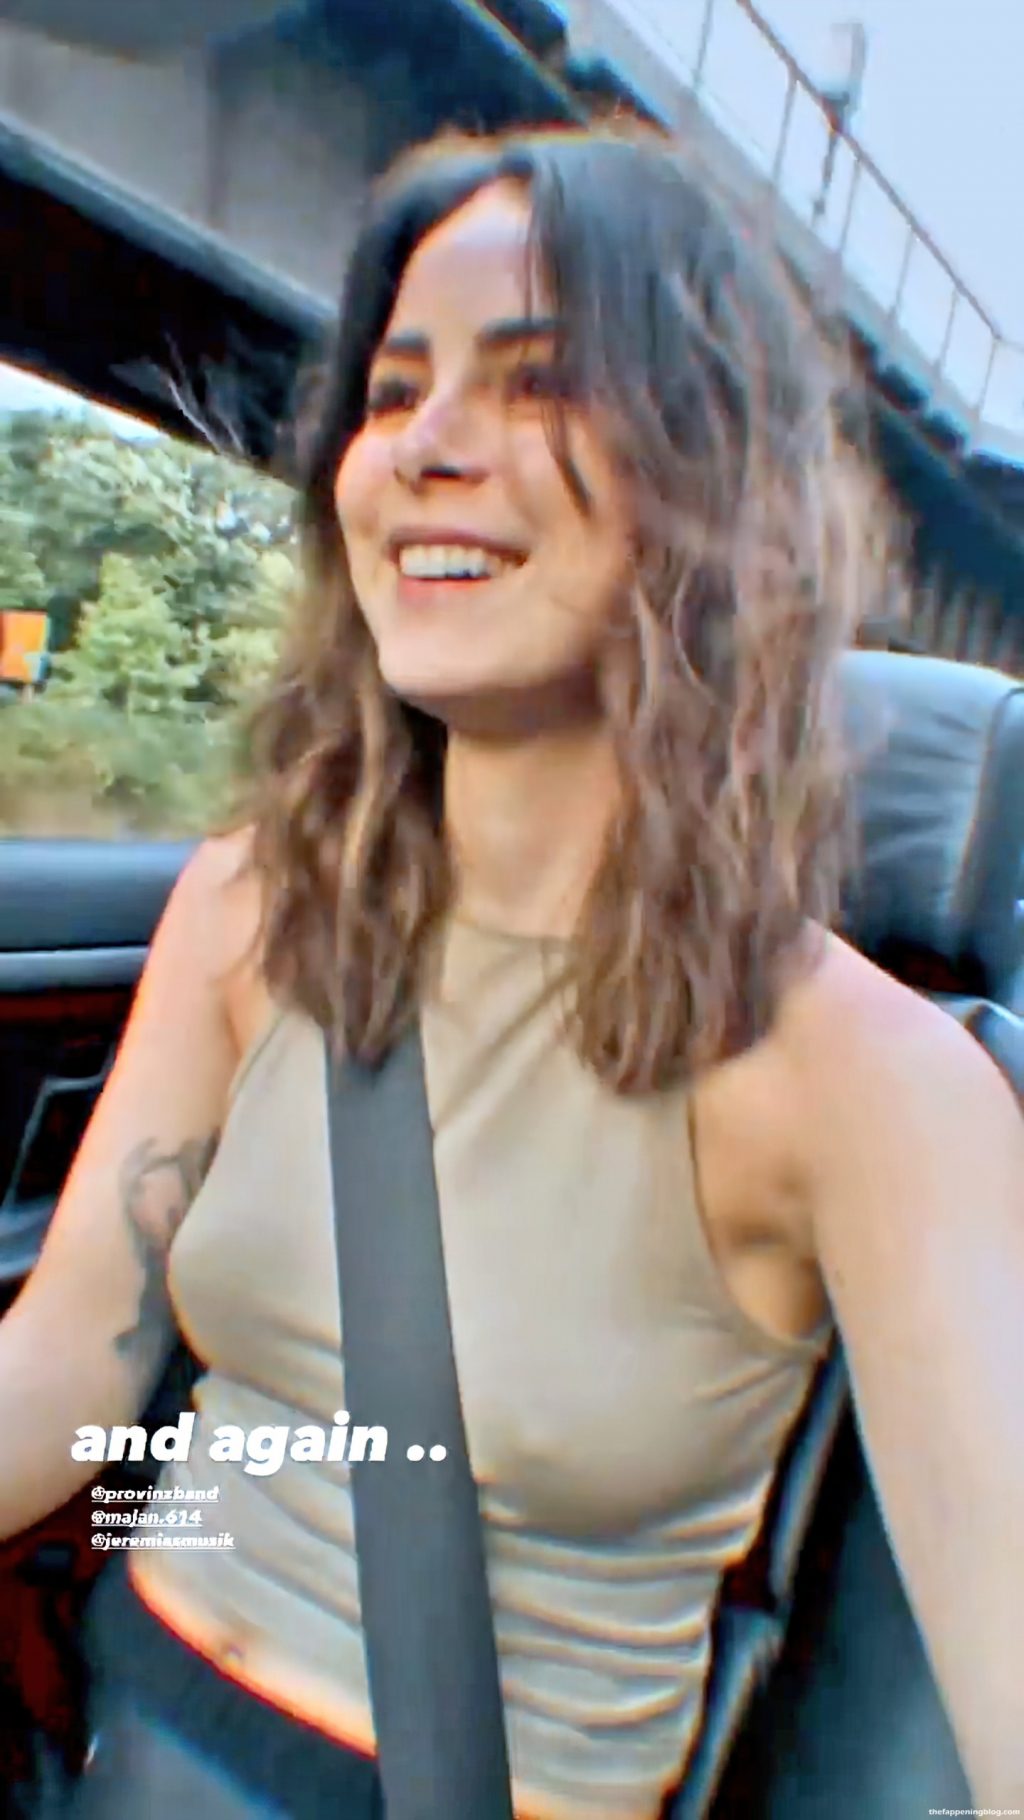 Lena Meyer-Landrut Shows Her Pokies While Driving (8 Pics + Video)